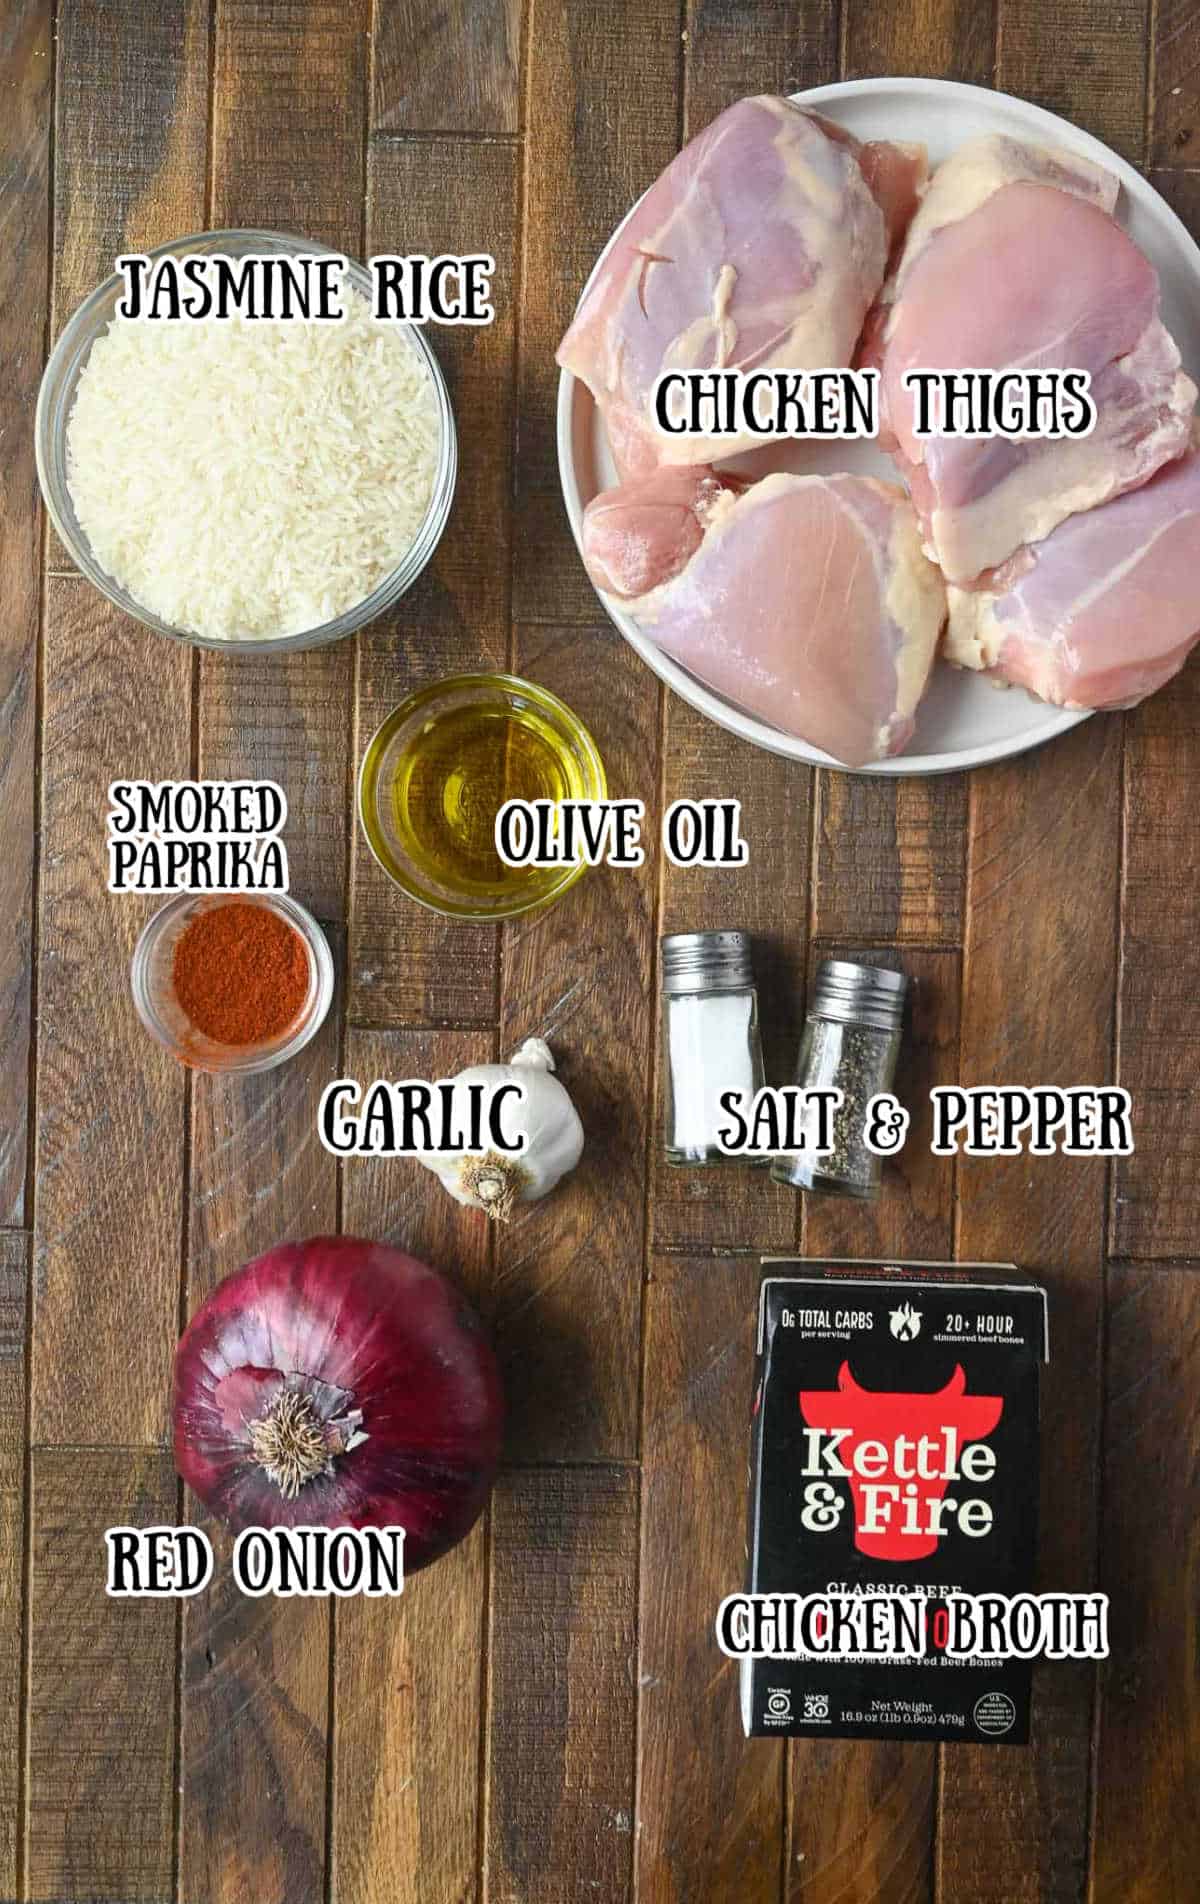 All the ingredients needed for this recipe